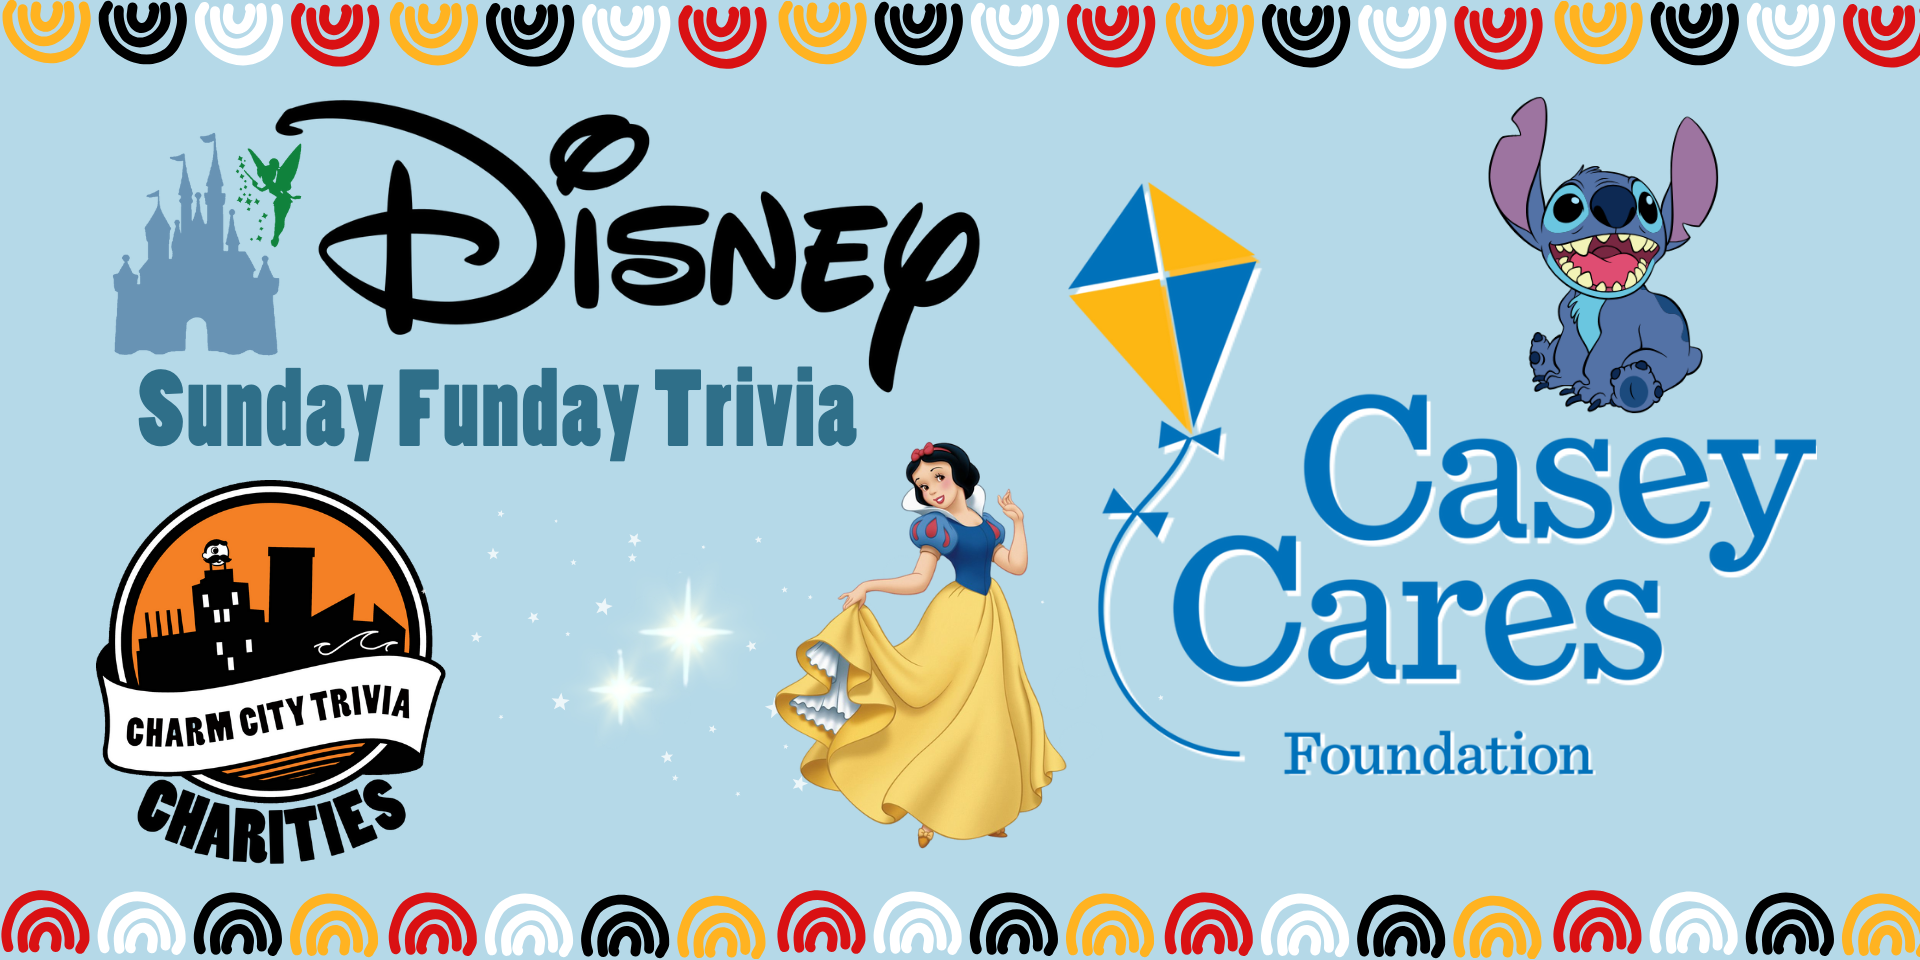 a light blue background with a colorful border, the Charm City Trivia Charities logo, the Casey Cares logo, the Disney logo, Snow White, Stitch, the Disney castle, Tinker Bell, the stars from Peter Pan, and dark blue text. The text reads: Sunday Funday Trivia